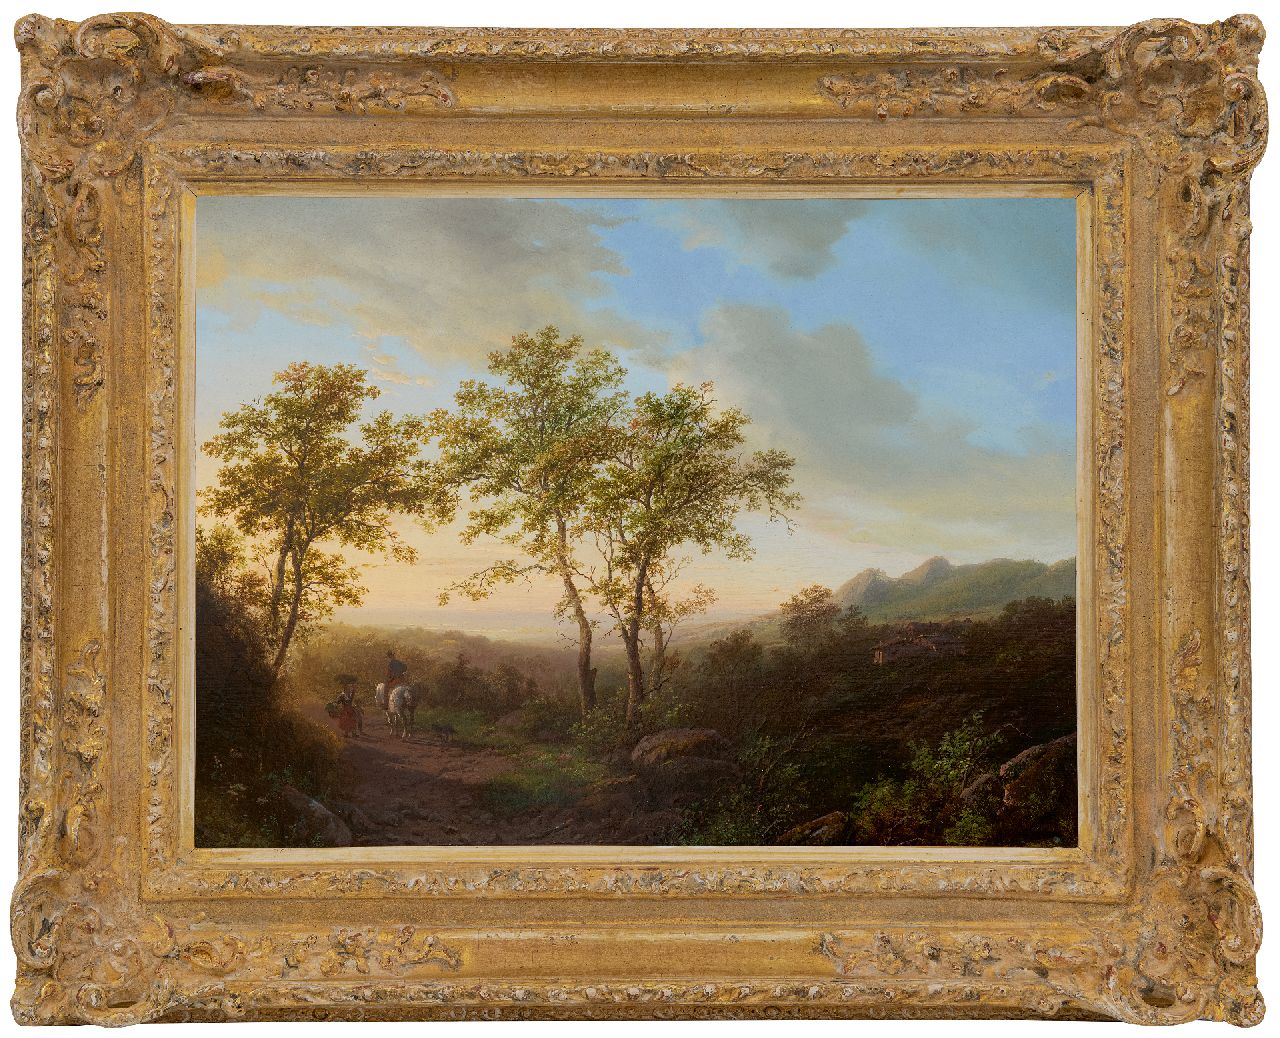 Bodeman W.  | Willem Bodeman | Paintings offered for sale | Hilly landscape at evening twilight, oil on panel 38.6 x 52.0 cm, signed l.r. and dated 1842